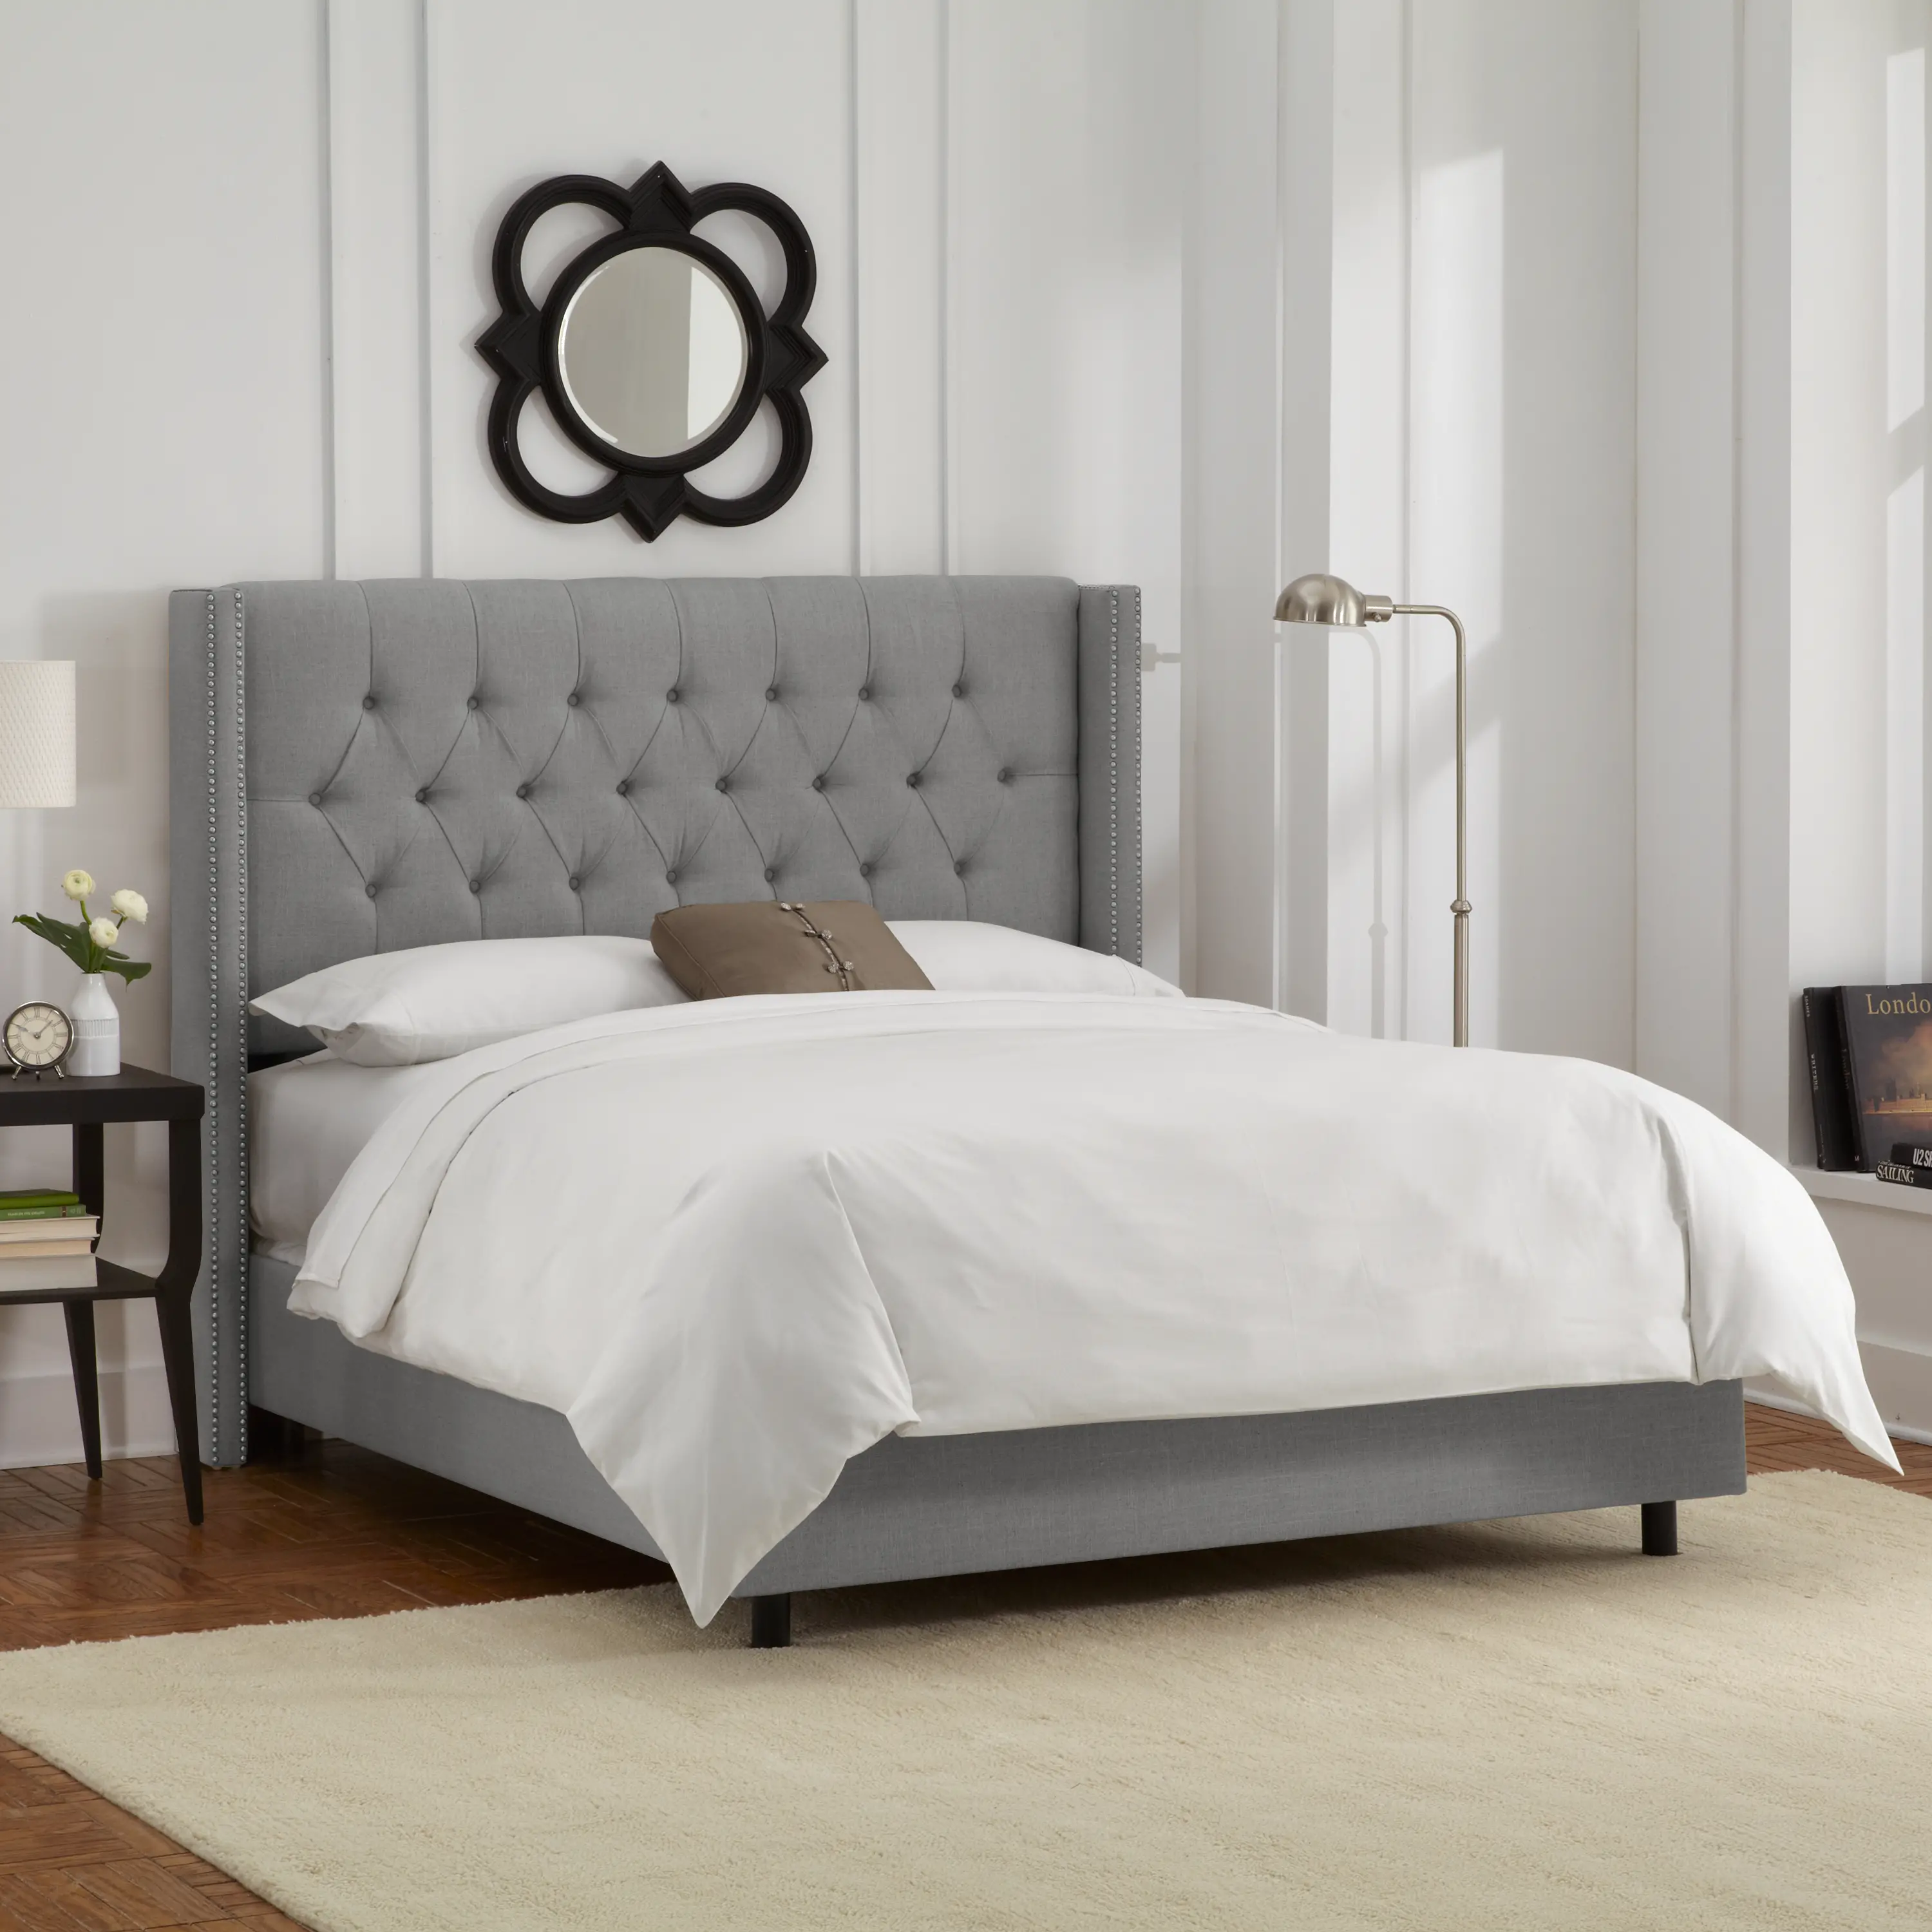 142NBBED-PWLNNGR Abigail Gray Diamond Tufted Wingback Queen Bed - S sku 142NBBED-PWLNNGR